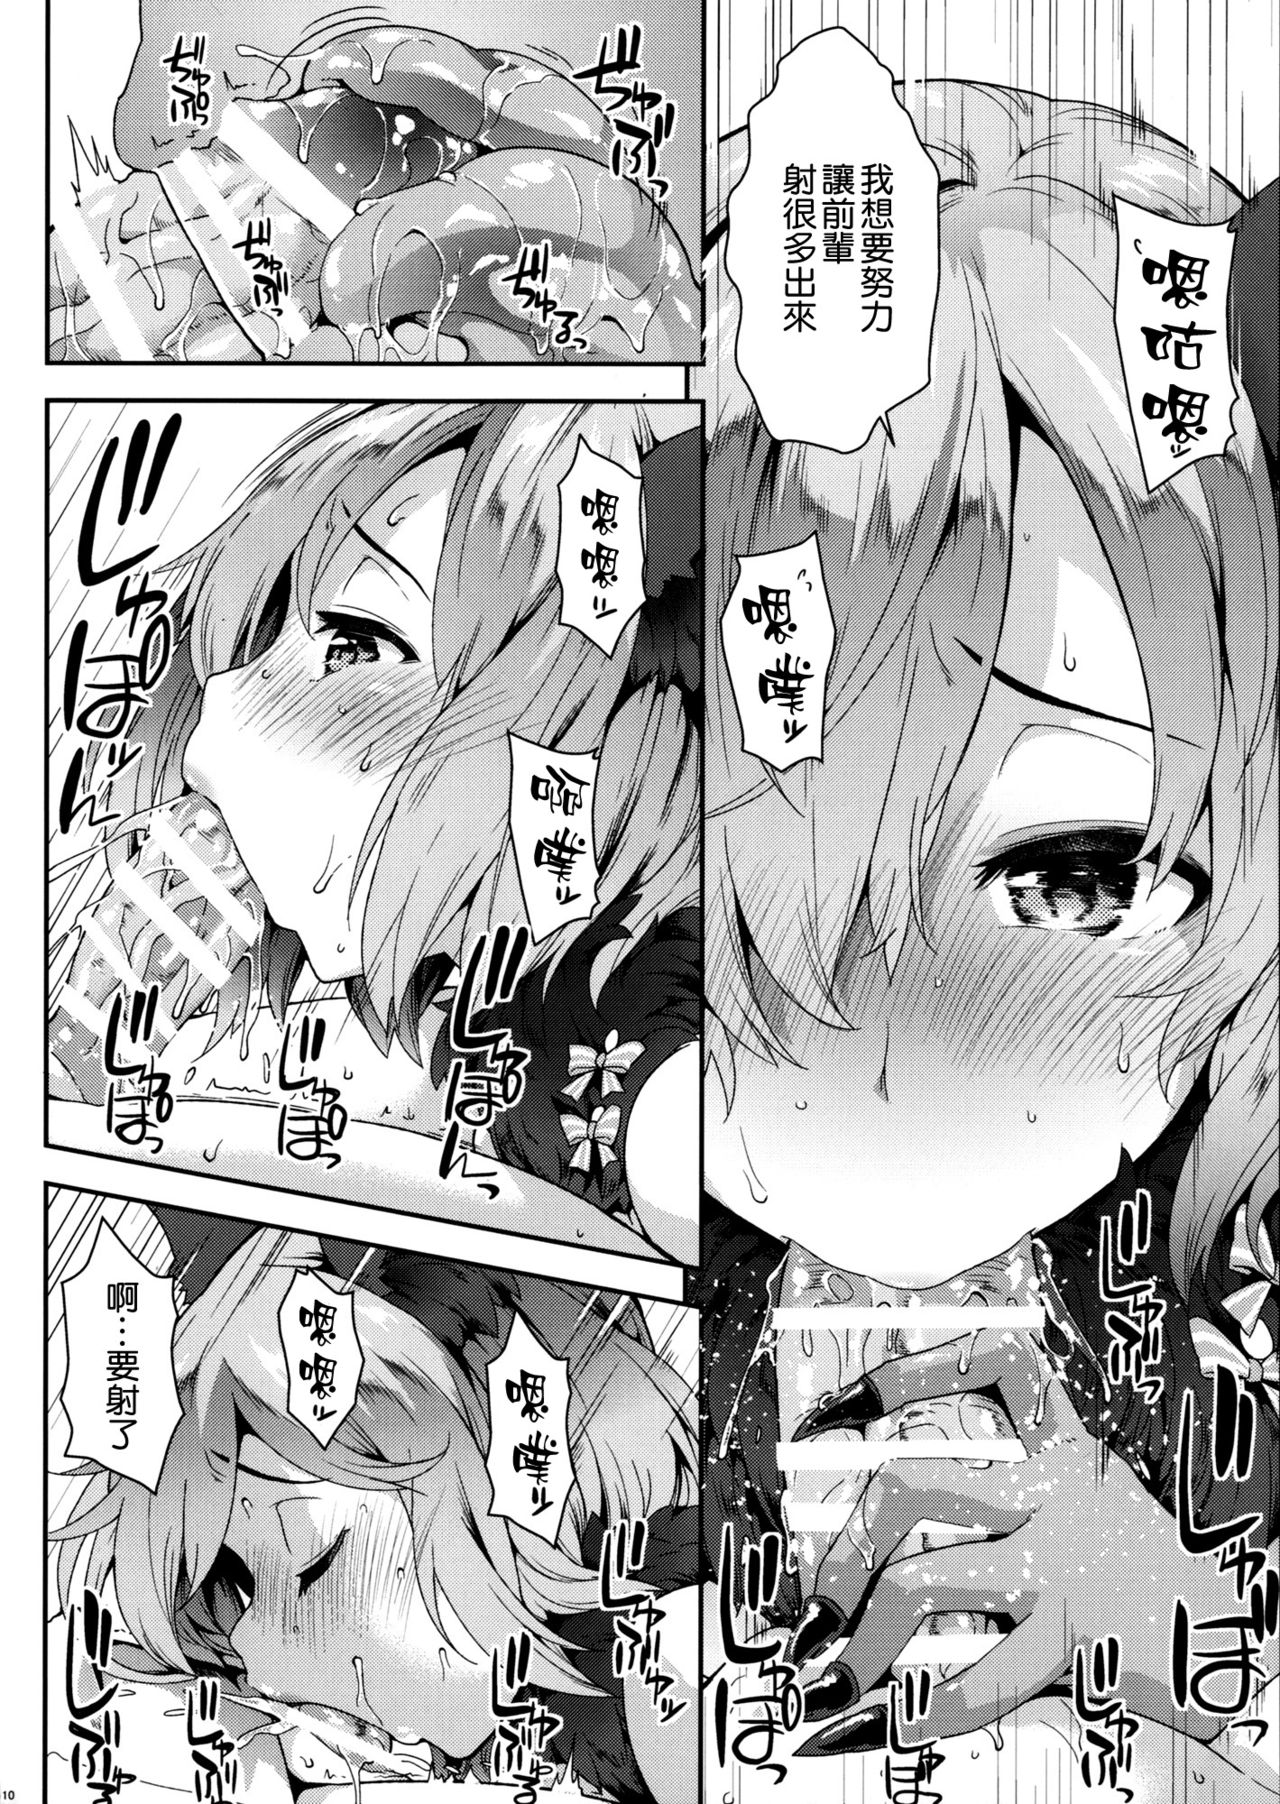 (C91) [SAZ (soba)] Why am I jealous of you? (Fate/Grand Order) [Chinese] [空気系☆漢化] (C91) [SAZ (soba)] Why am I jealous of you? (Fate/Grand Order) [中国翻訳]